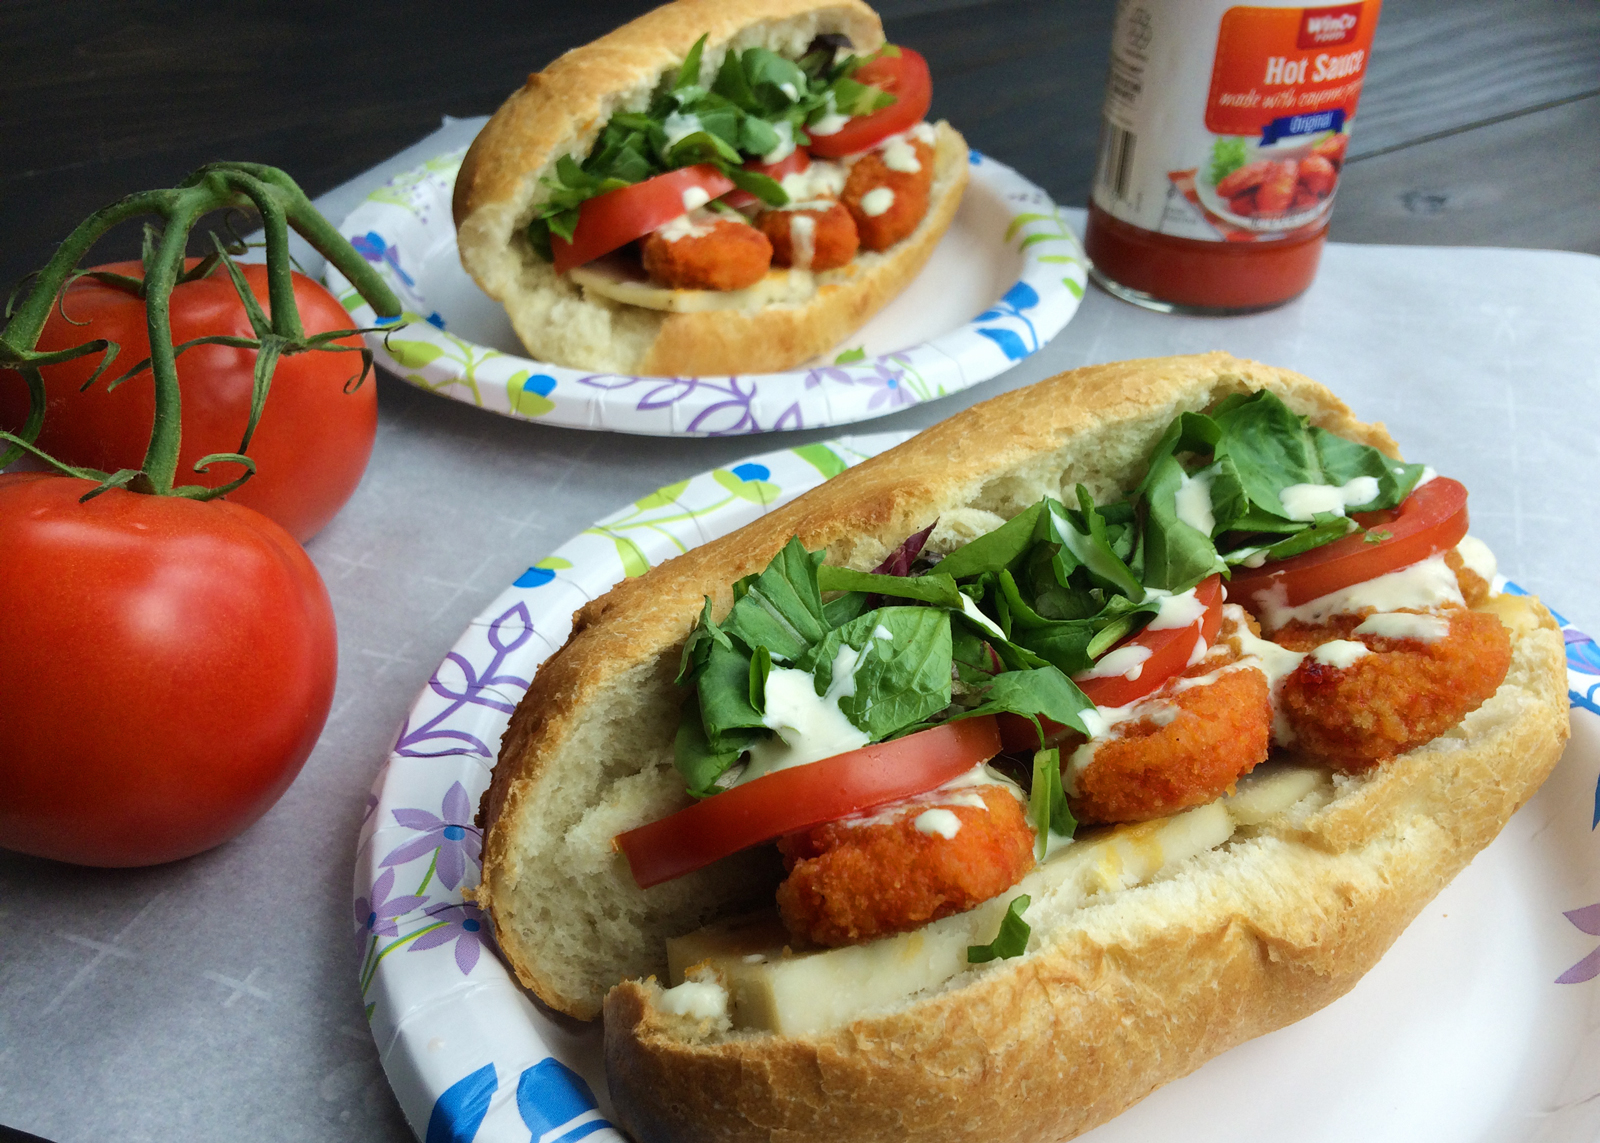 Buffalo “Chicken Finger” Subs with “Blue Cheese” Dressing